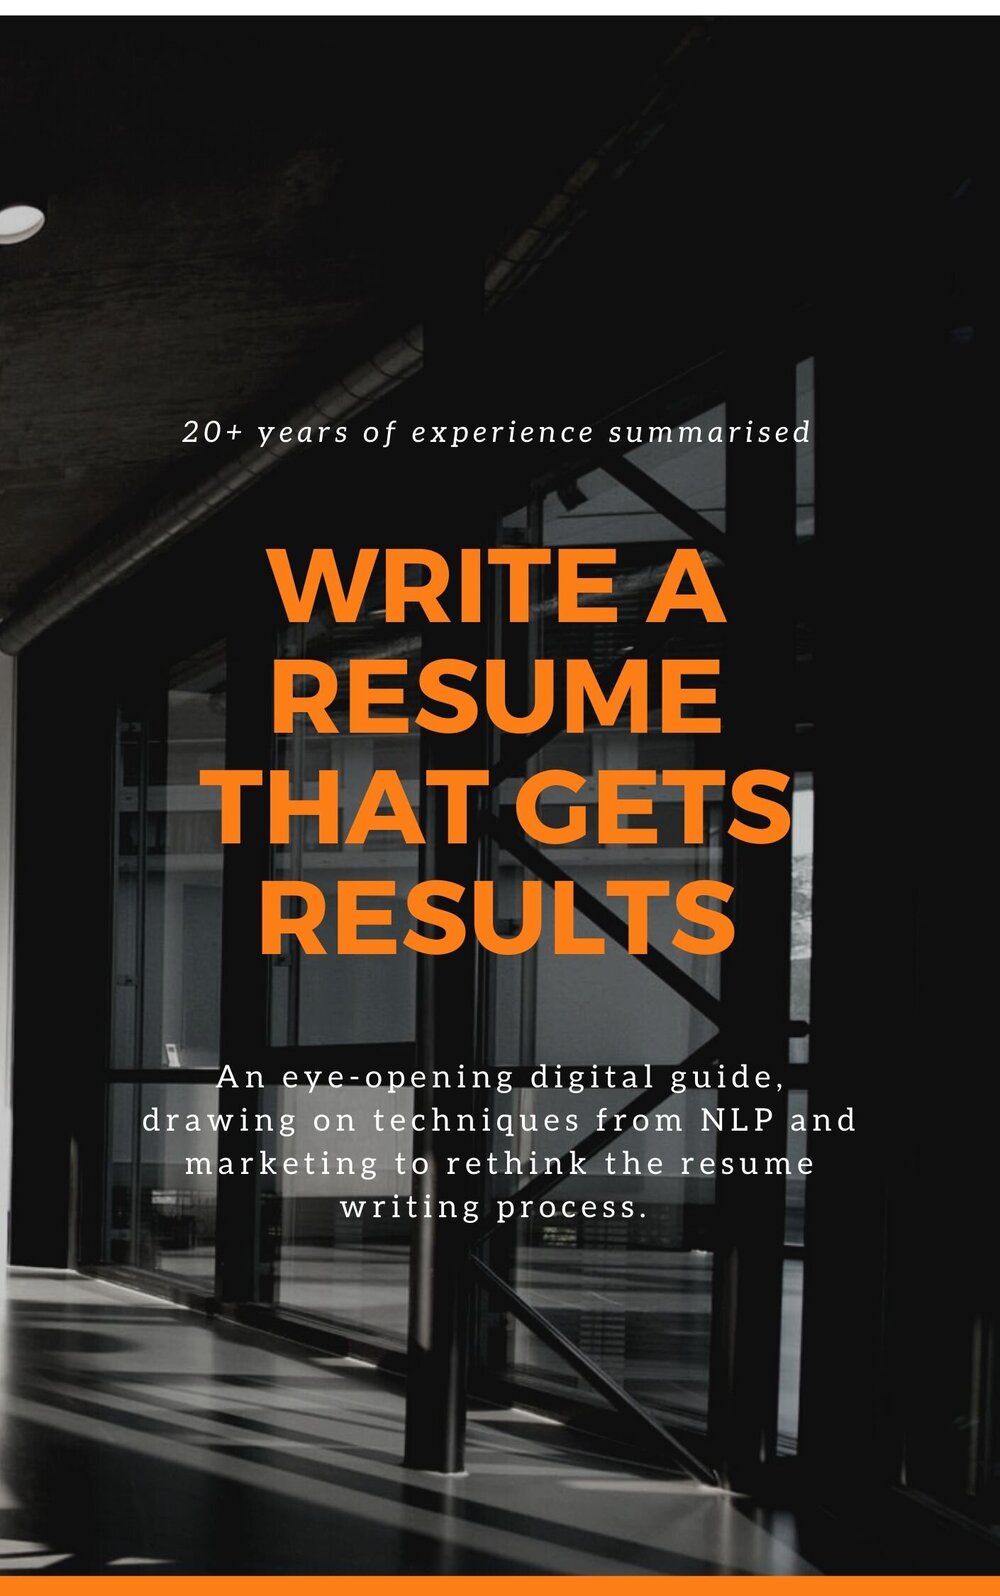 write+a+resume+that+get+results+(2).jpeg